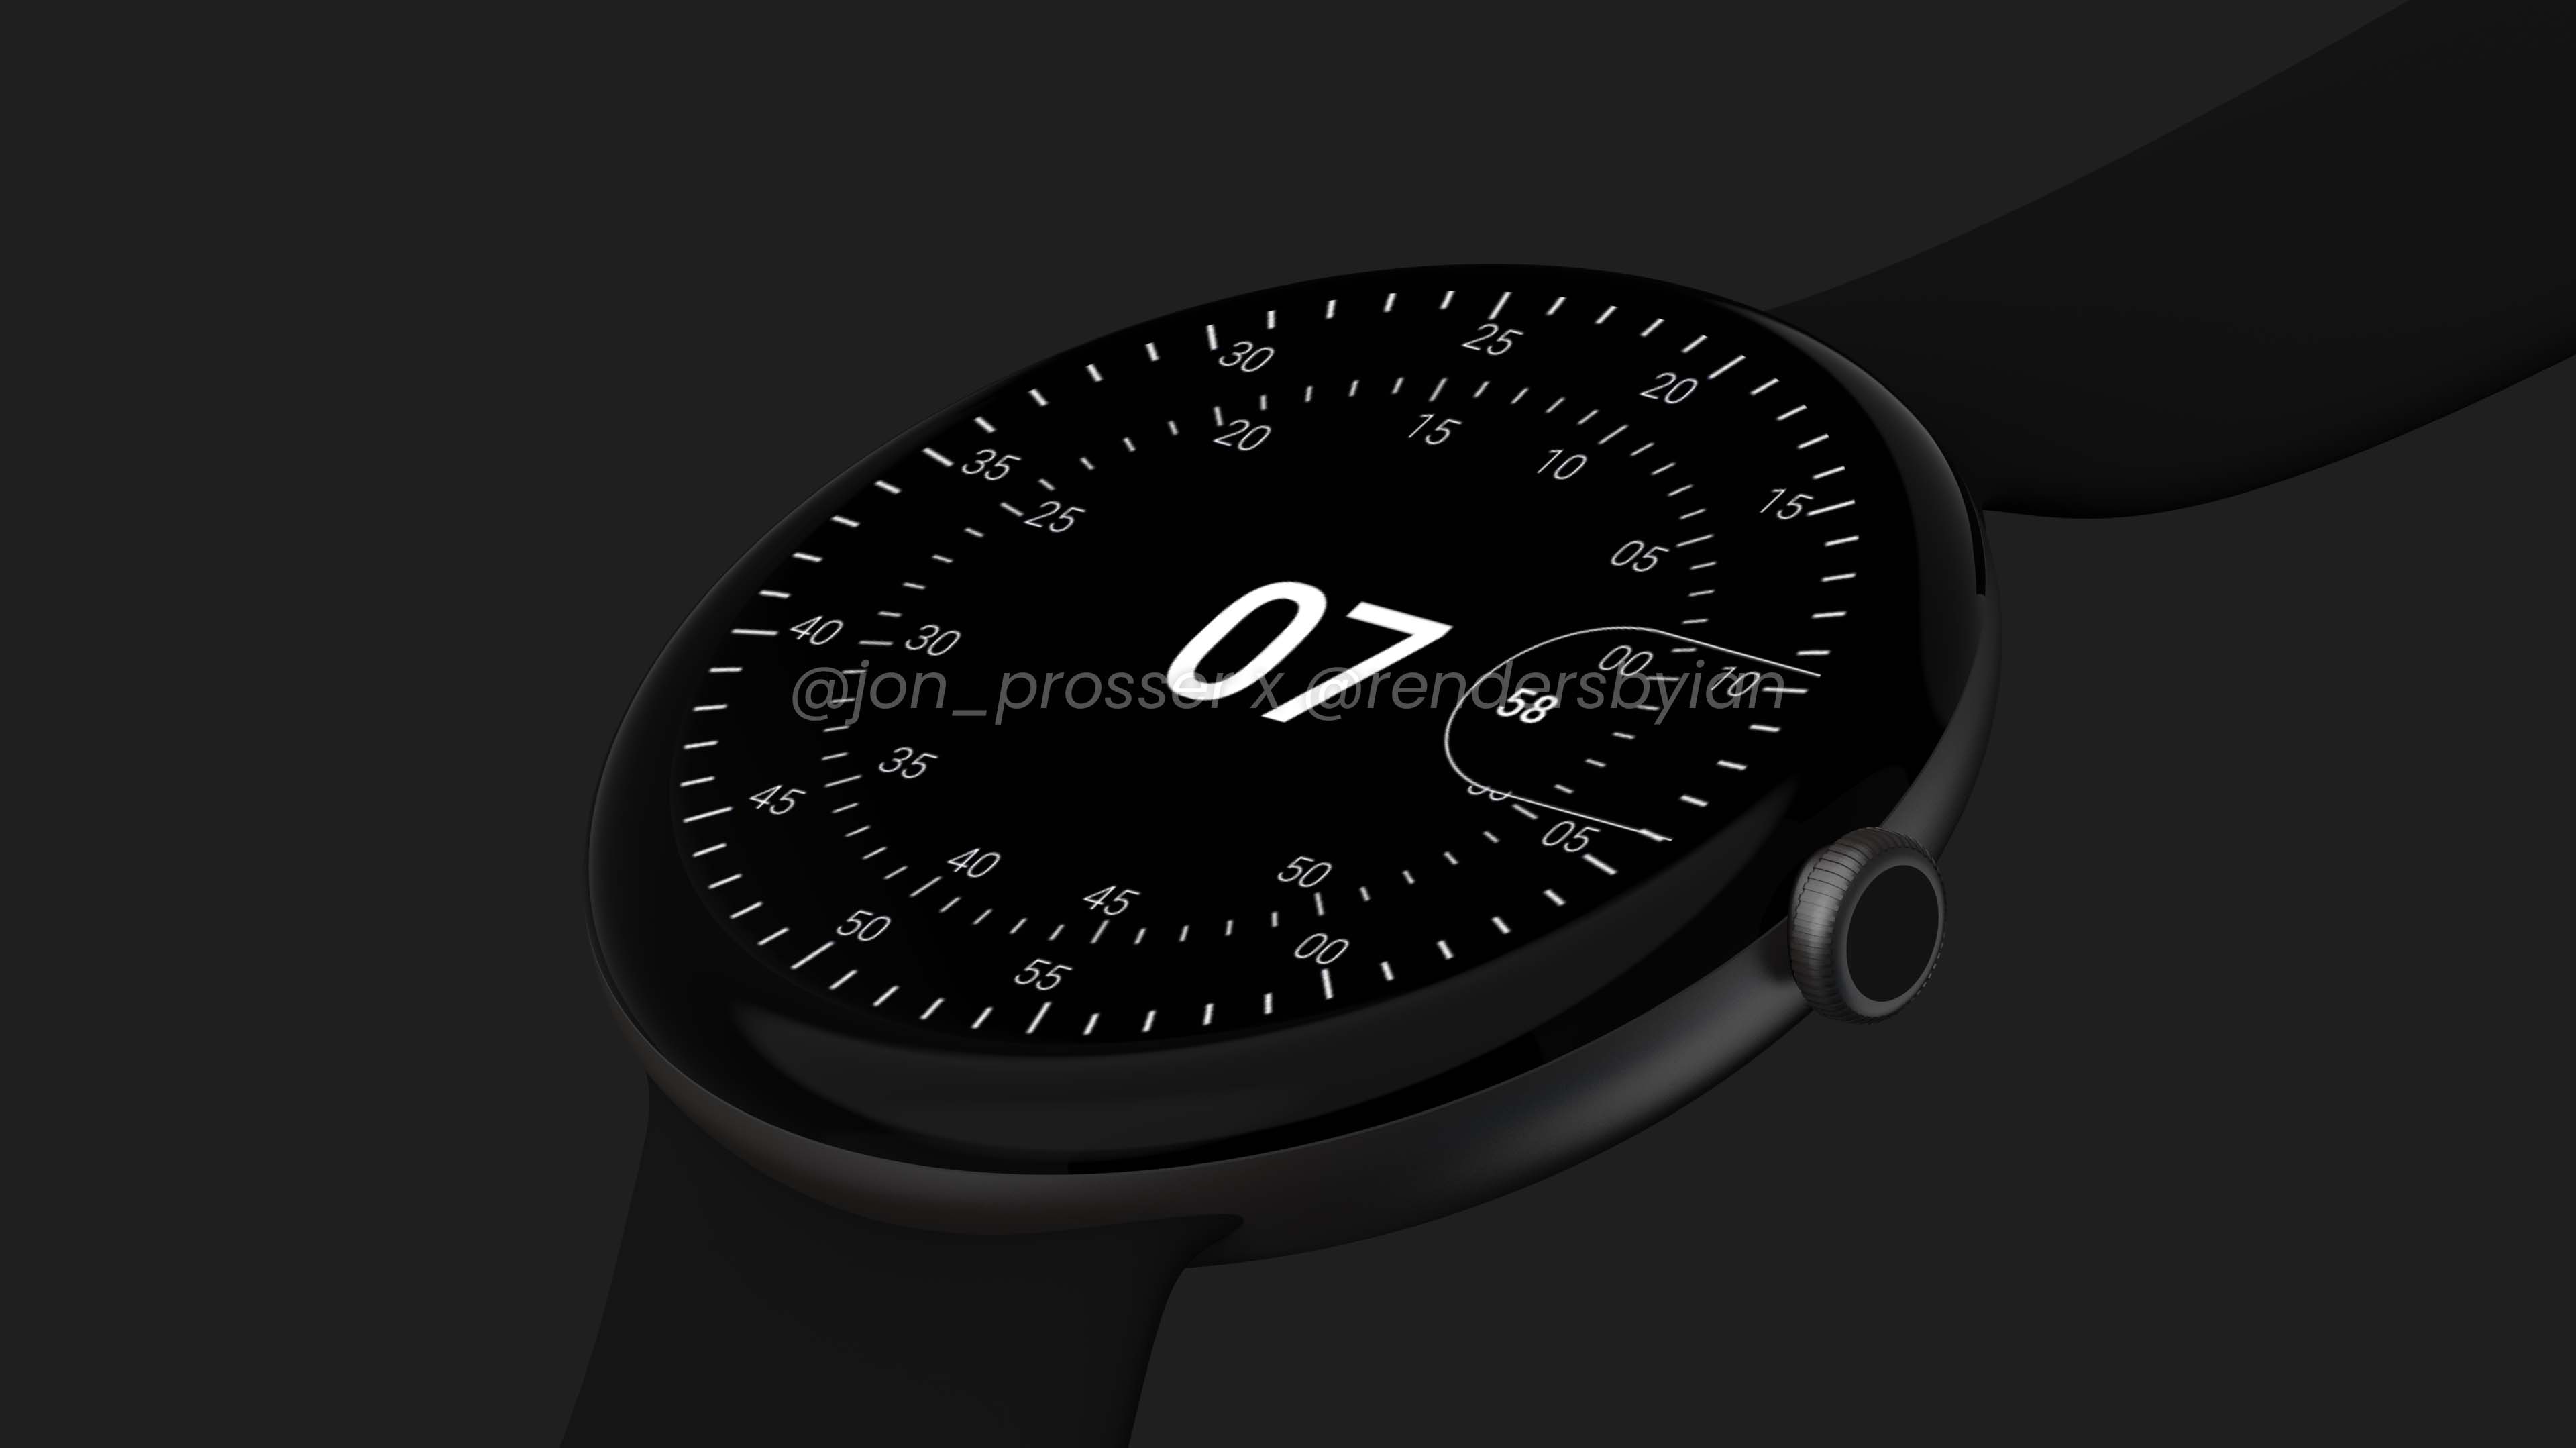 Google Pixel Watch With Round Design and Wear OS Support Leaked: Specs